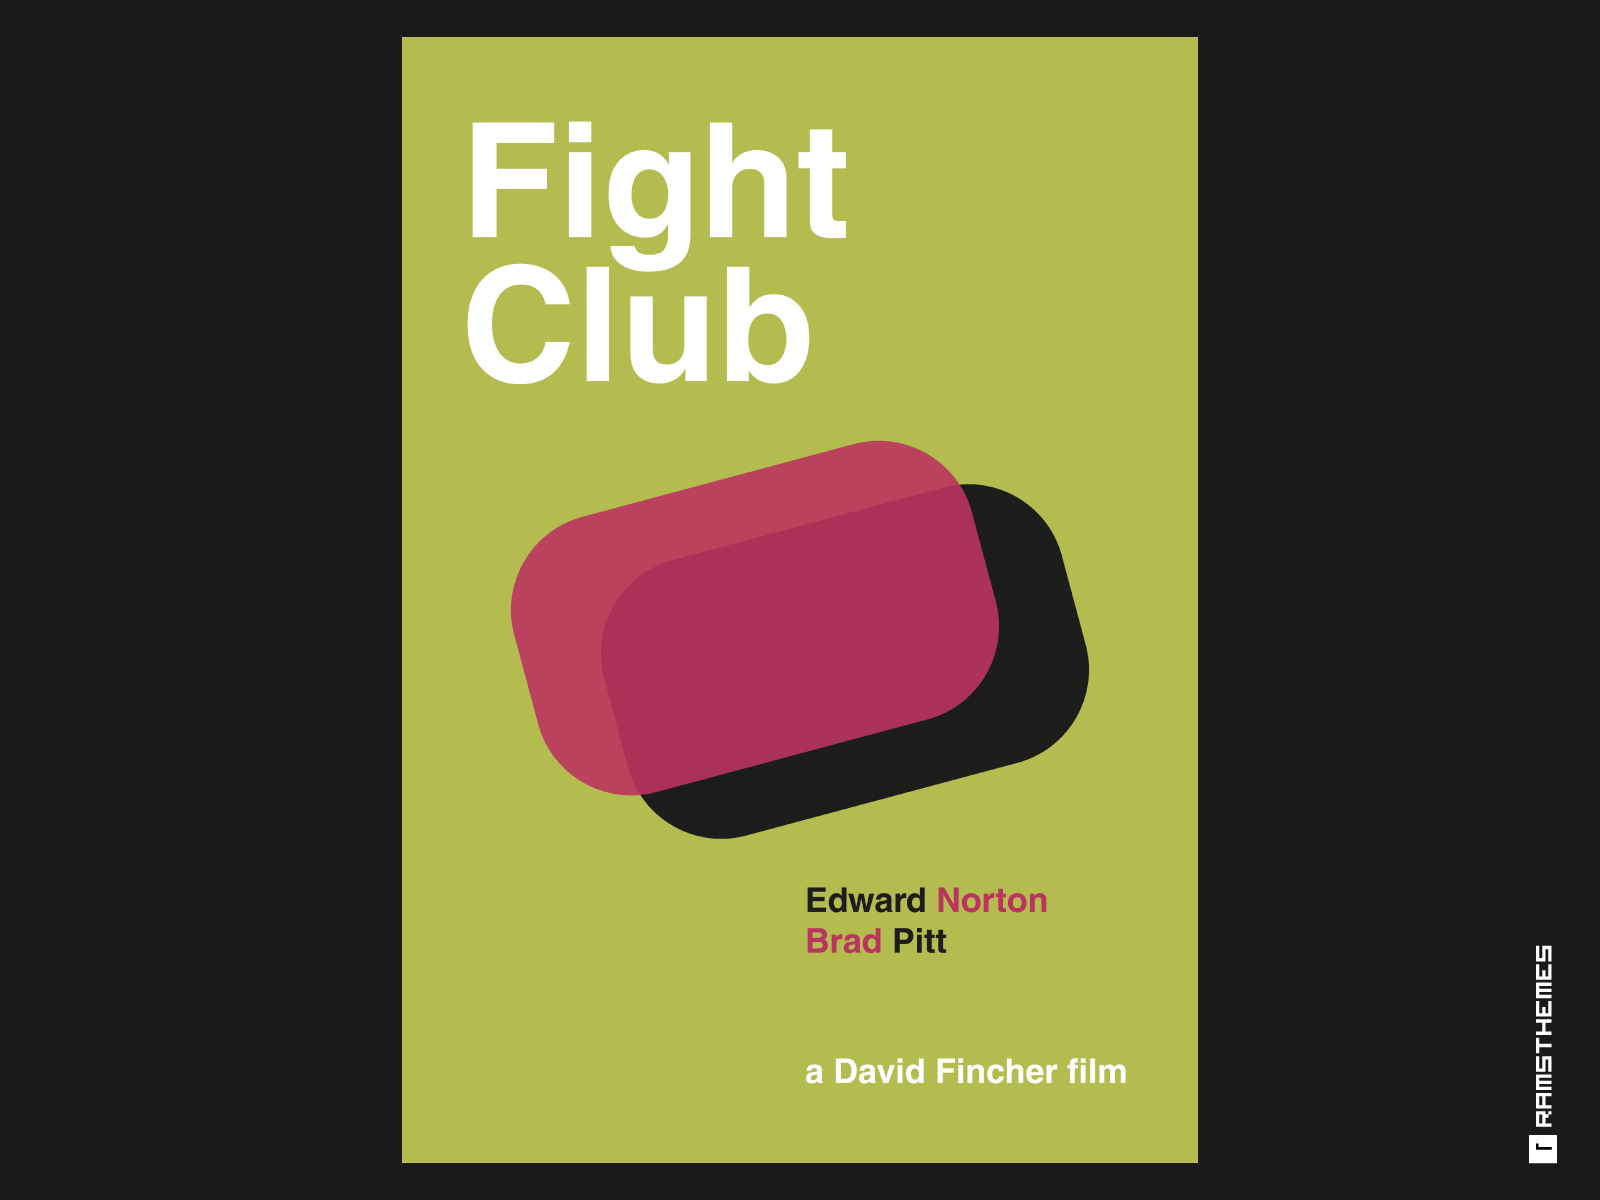 FIGHT CLUB - Minimalist Swiss Style Movie Poster by Rams Themes on Dribbble